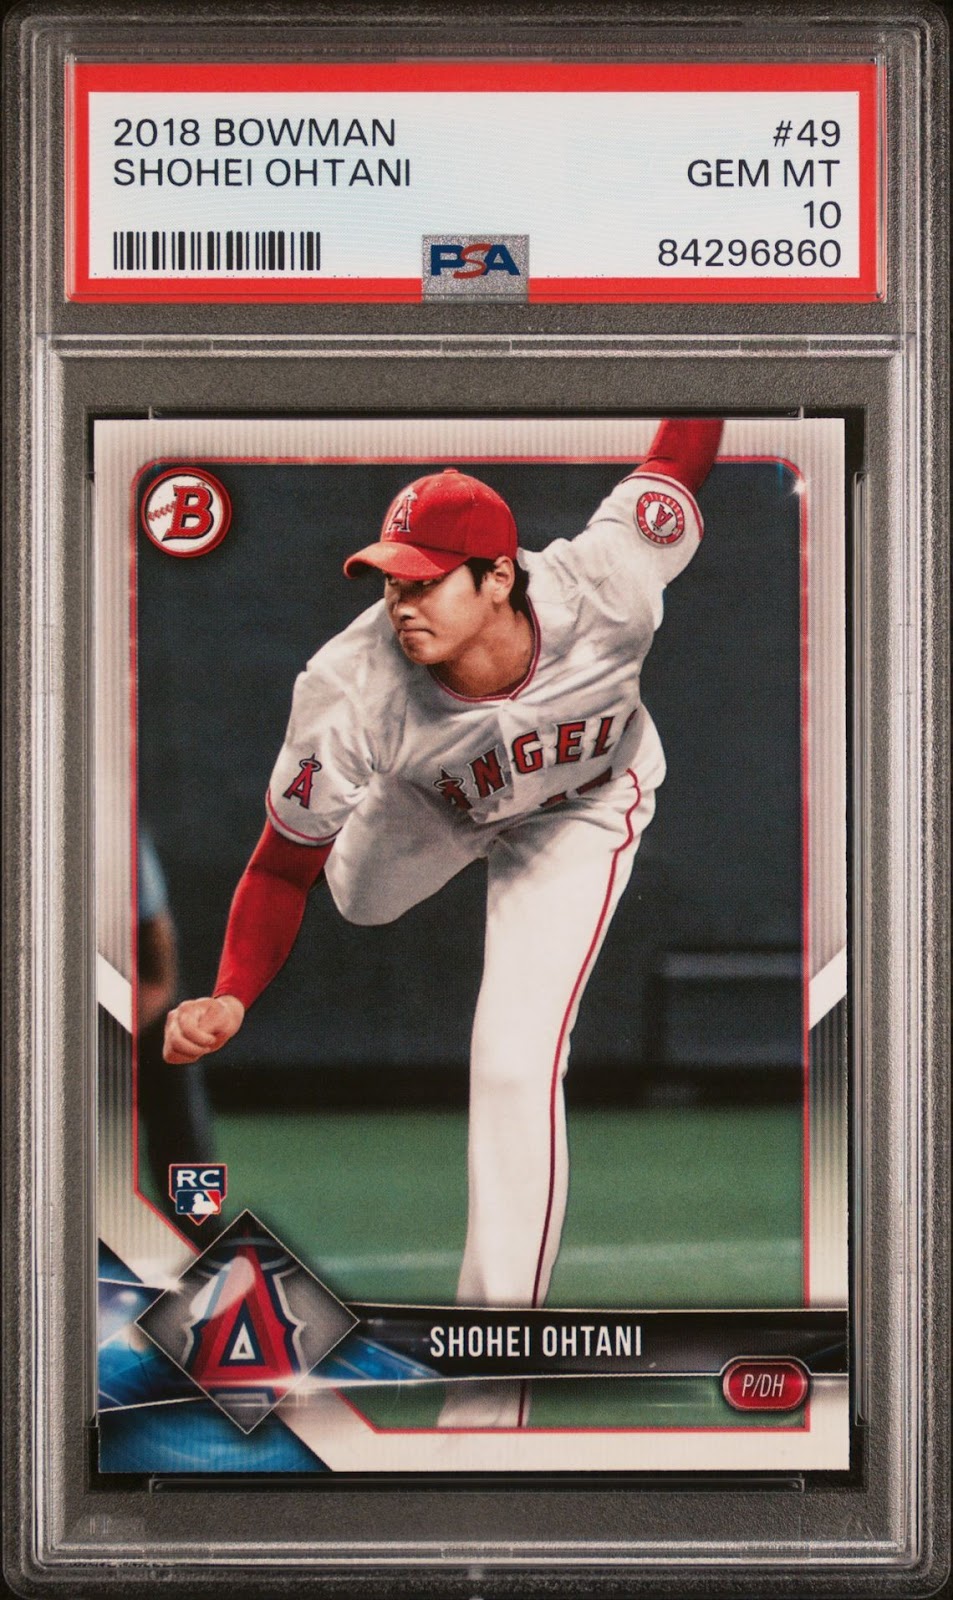 Top 10 PSA Card Submissions 2023: Ohtani